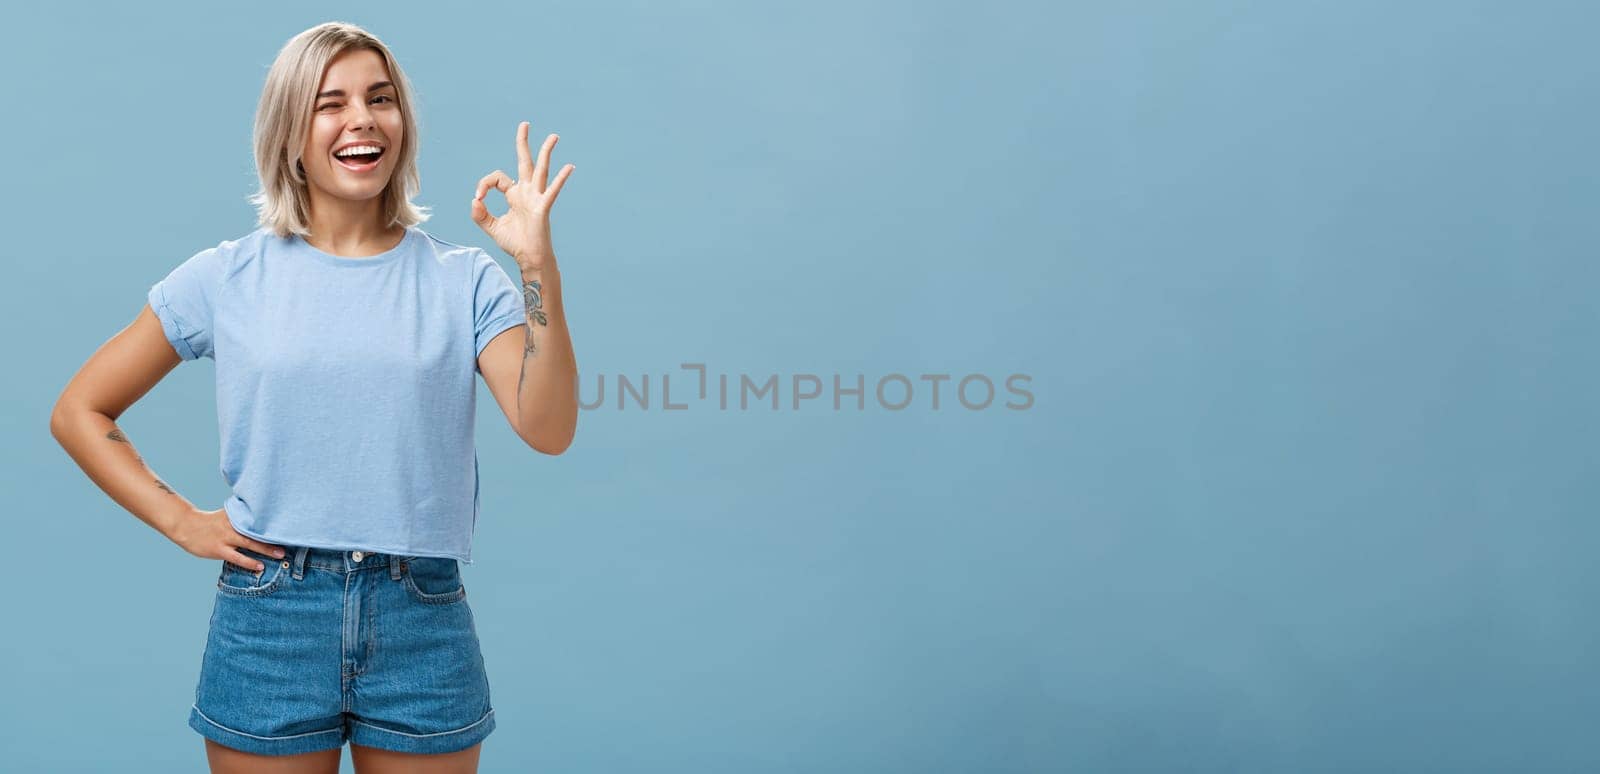 Confident and smart girl got everything under control. Portrait of optimistic good-looking girl with fair hair and tanned skin winking showing okay or perfect gesture standing over blue wall.